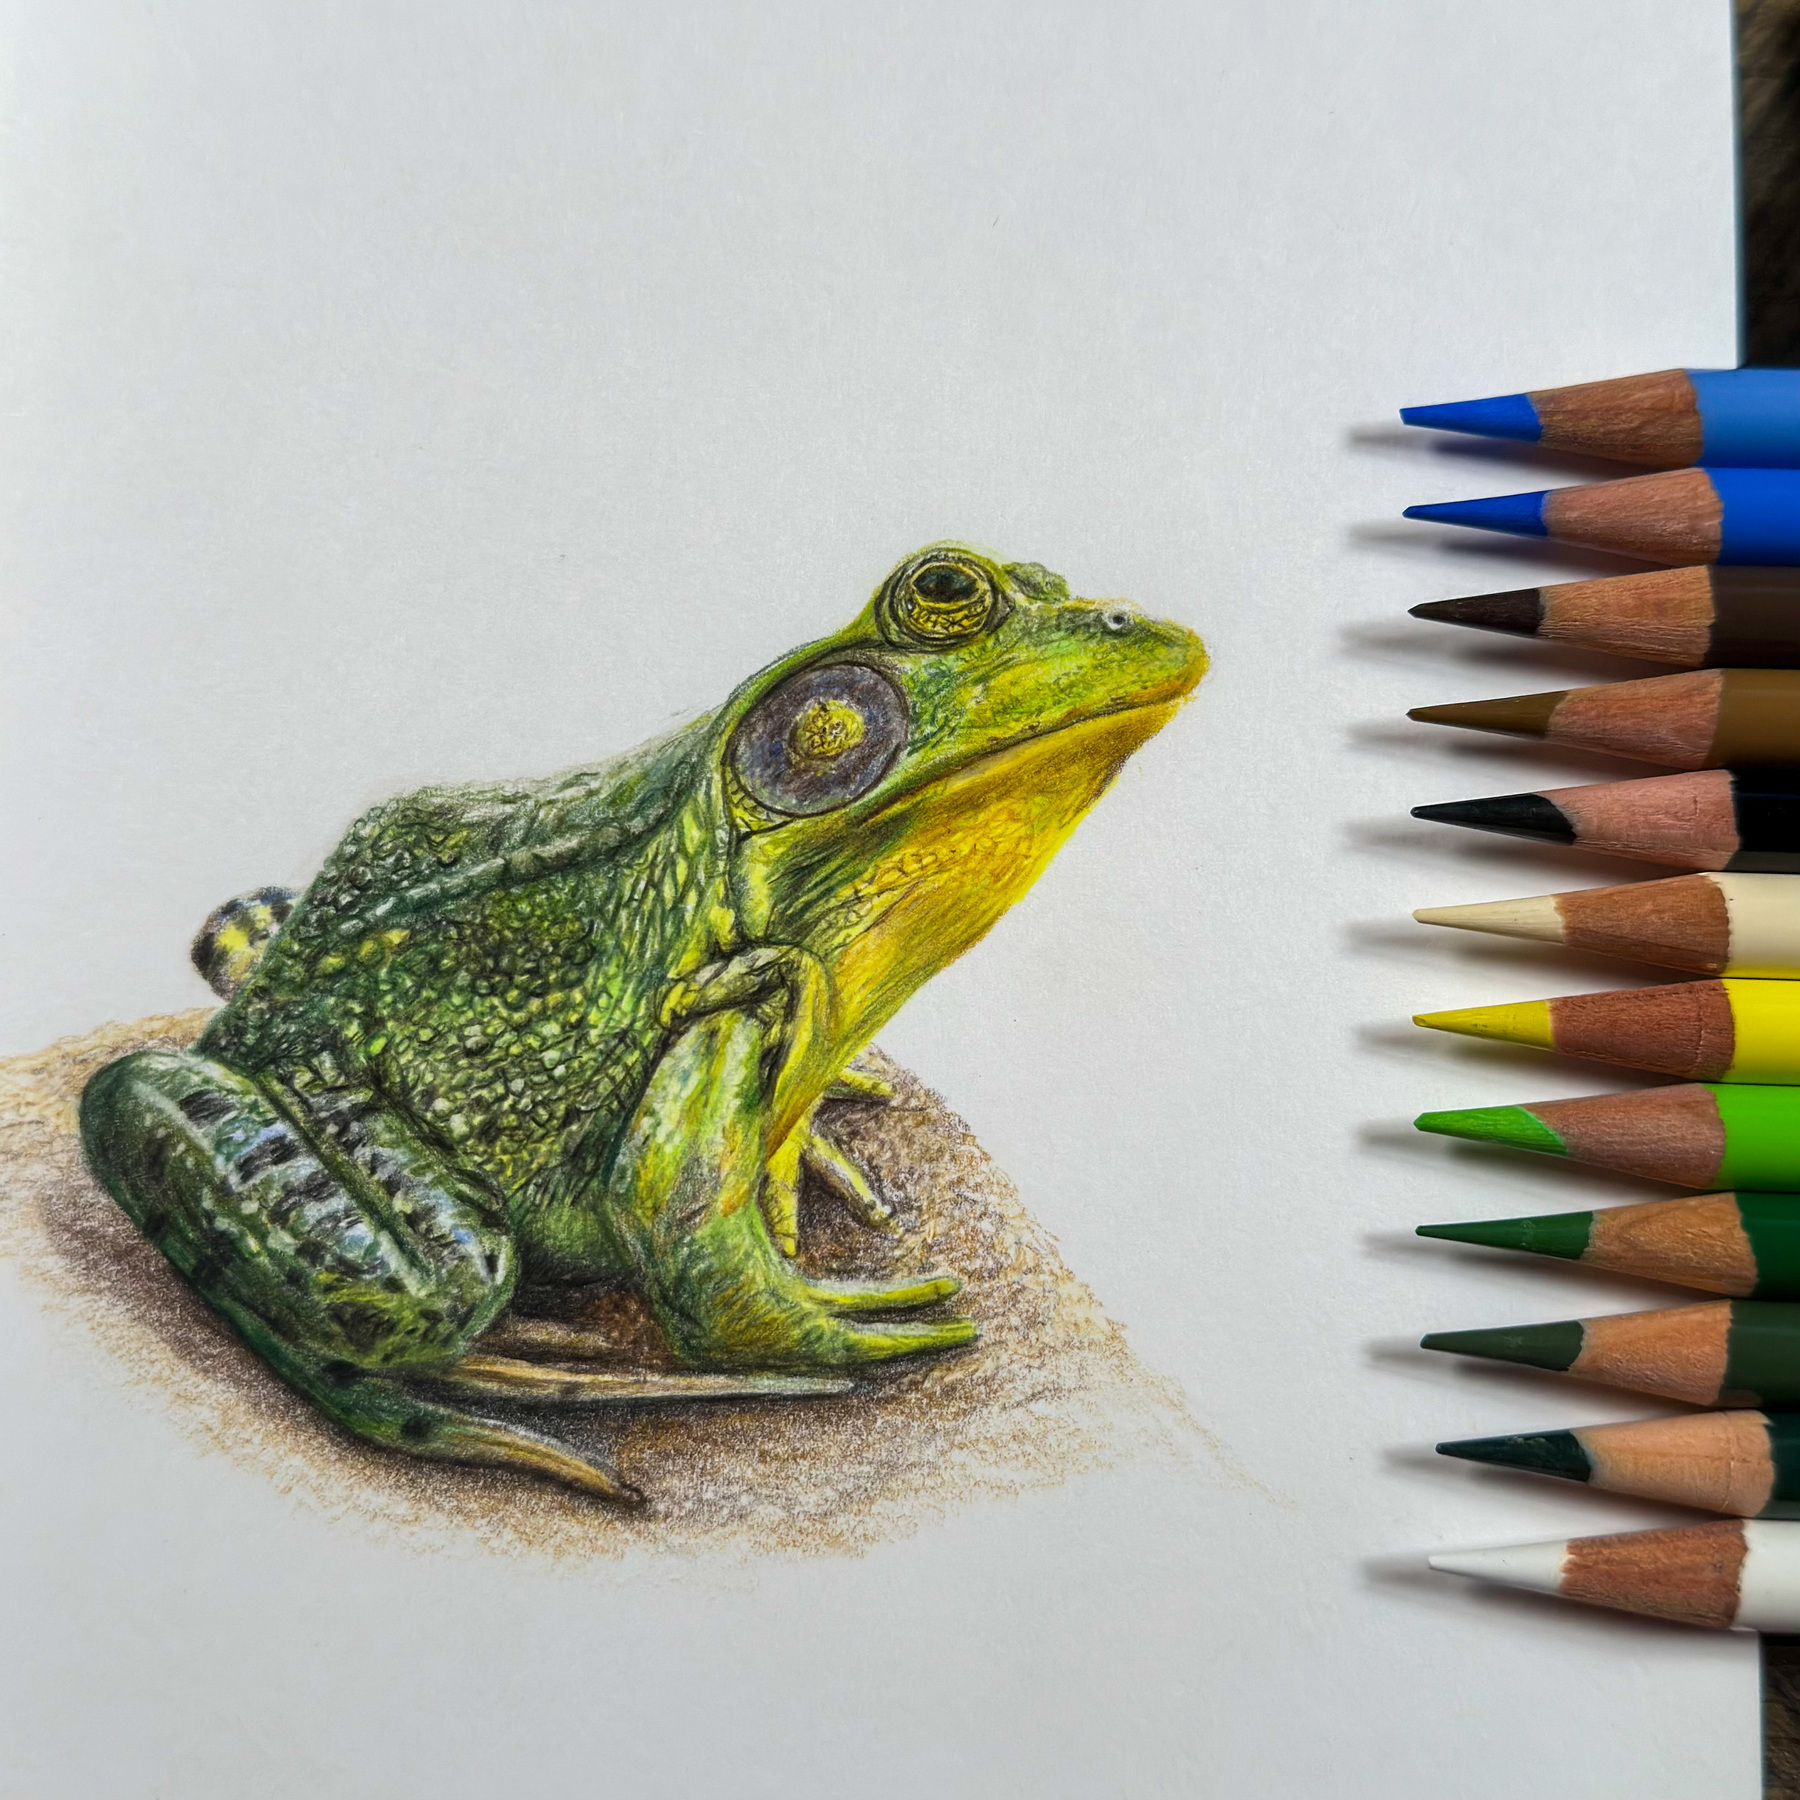 A hyper-realistic colored pencil drawing of a green frog, showcasing intricate details in its textured skin and vibrant green and yellow hues, with an array of colored pencils arranged neatly to the right.